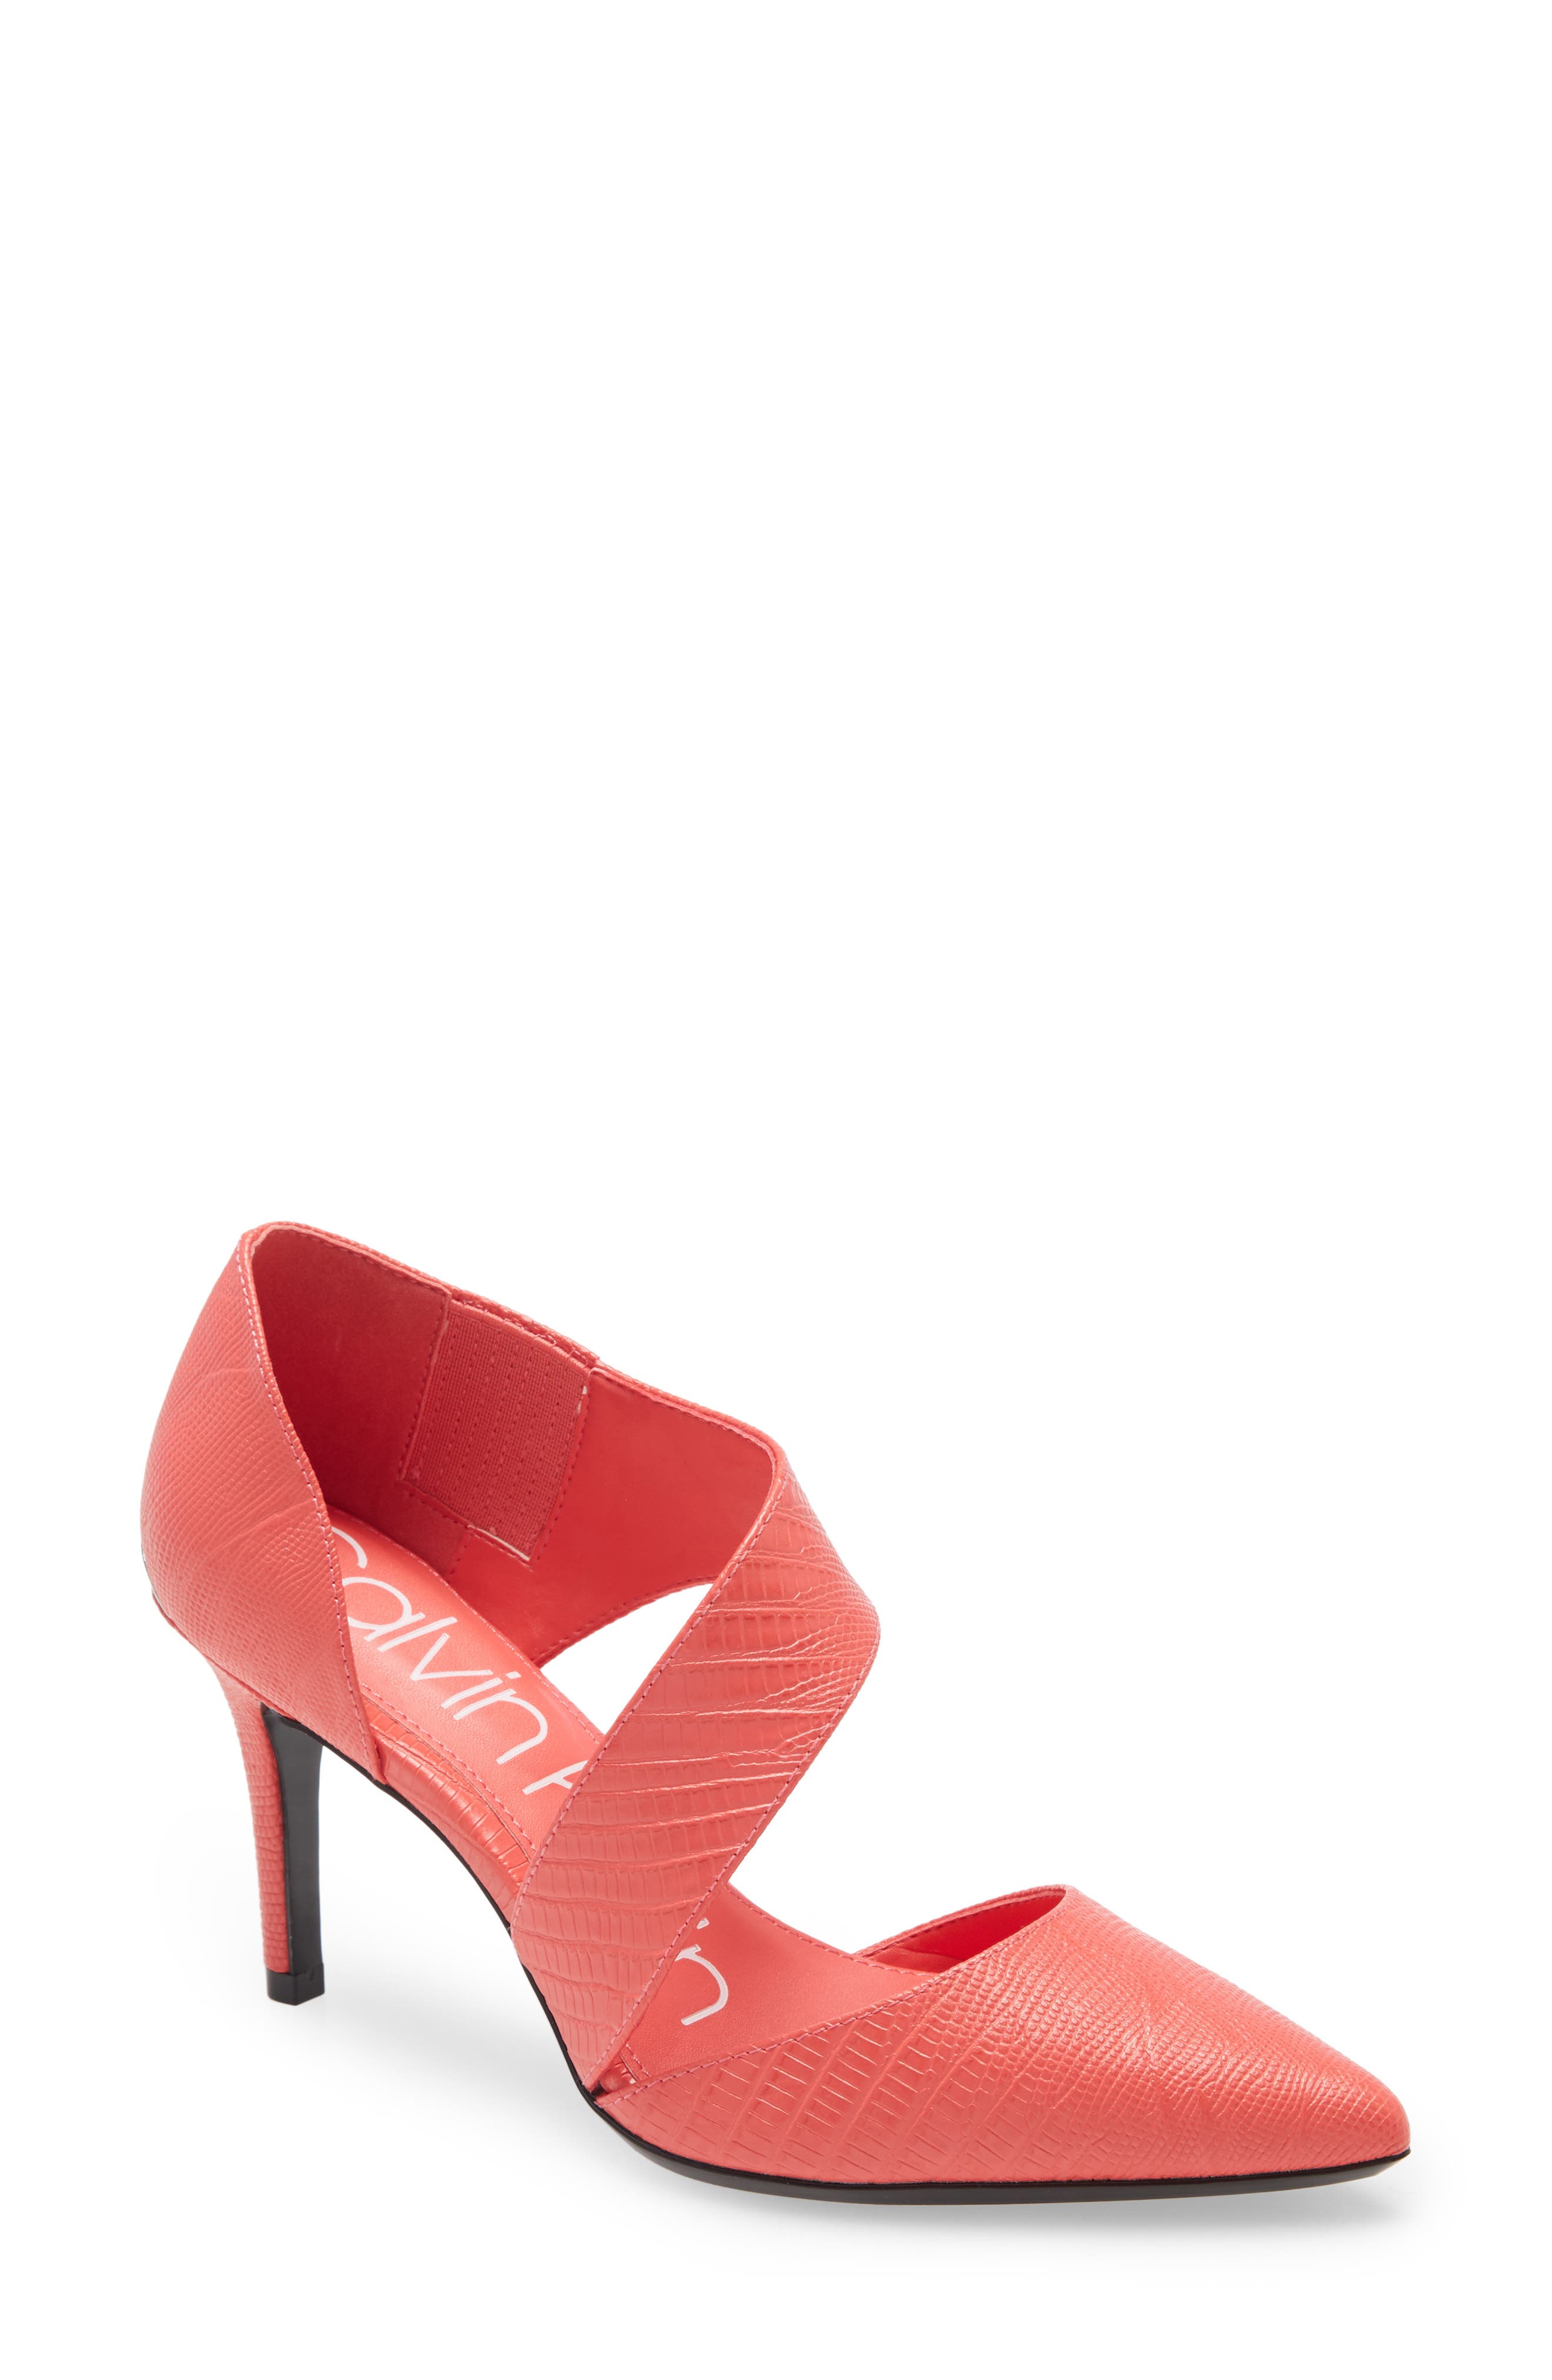 UPC 194060415086 product image for Women's Calvin Klein 'Gella' Pointy Toe Pump, Size 8.5 M - Coral | upcitemdb.com